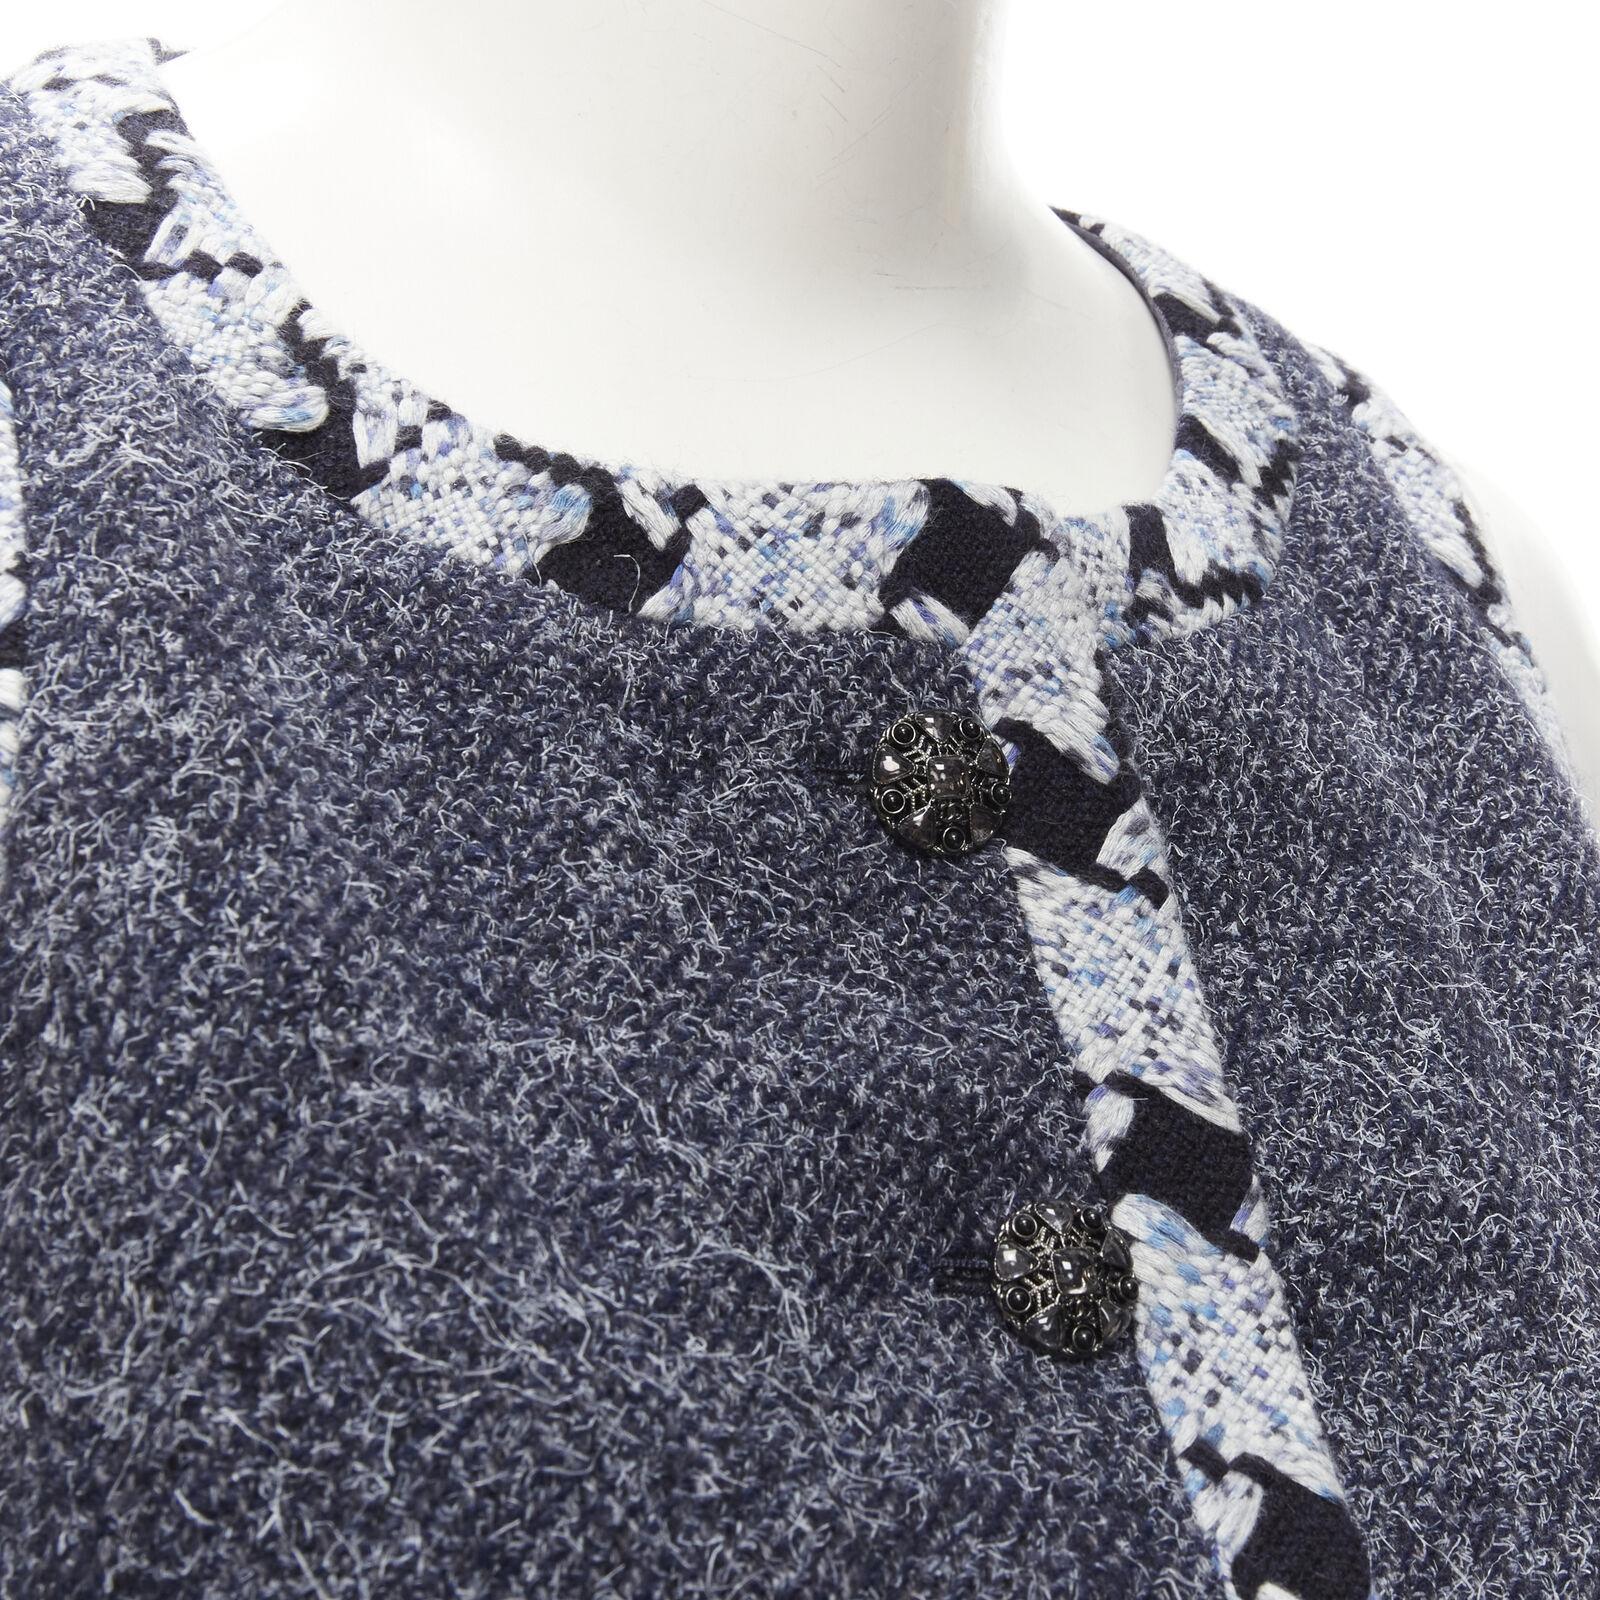 CHANEL wool cashmere blue tweed embroidery trim gripoix button cropped vest FR34
Reference: AAWC/A00291
Brand: Chanel
Designer: Virginie Viard
Material: Wool, Cashmere
Color: Blue
Pattern: Solid
Closure: Button
Lining: Silk
Extra Details: Wool